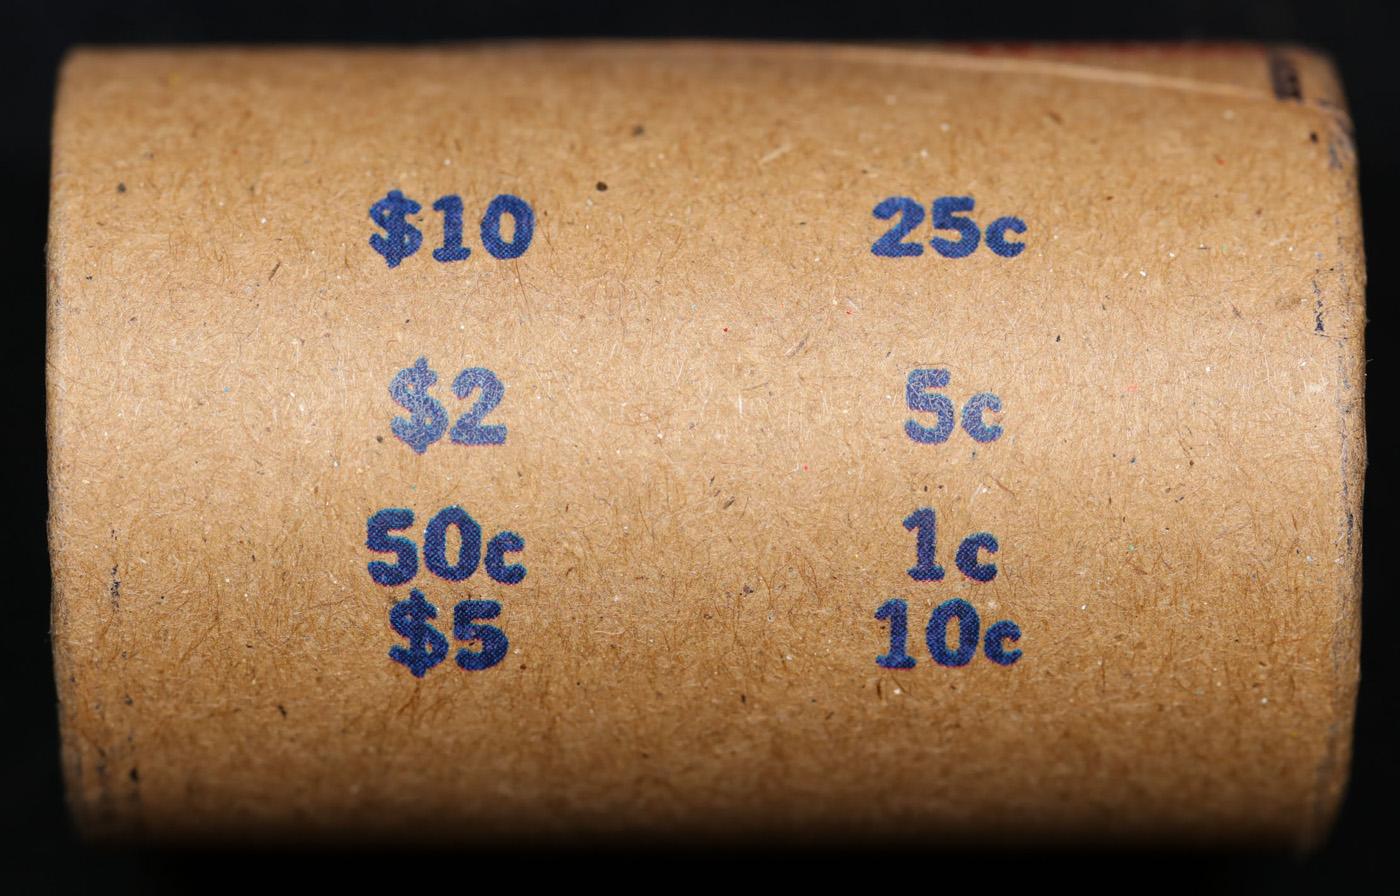 *EXCLUSIVE* Hand Marked "Unc Peace Reserve," x20 coin Covered End Roll! - Huge Vault Hoard  (FC)